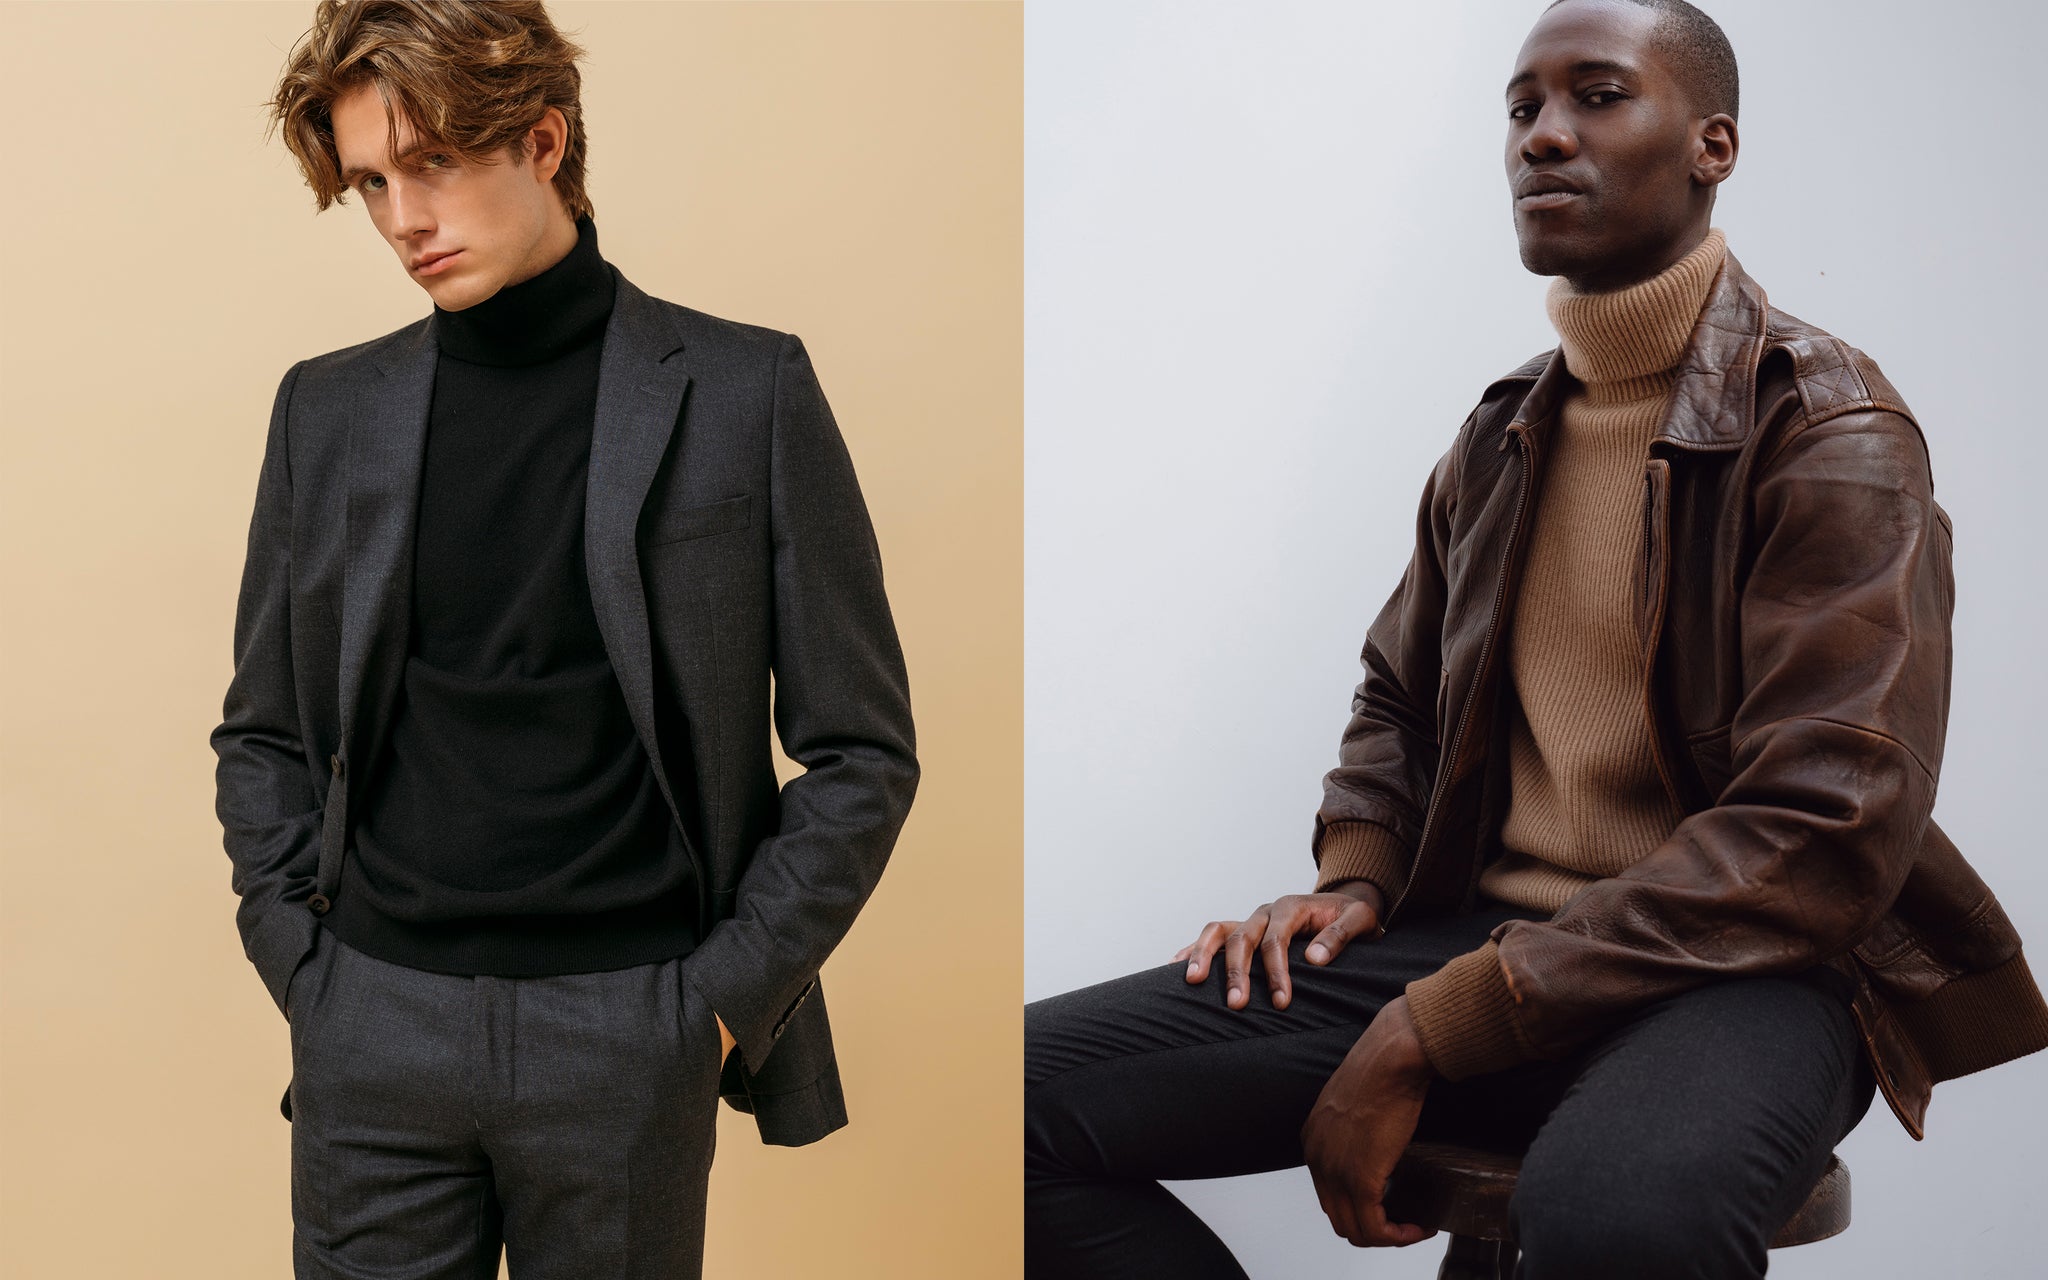 Styling knitwear with tailoring, jackets and coats